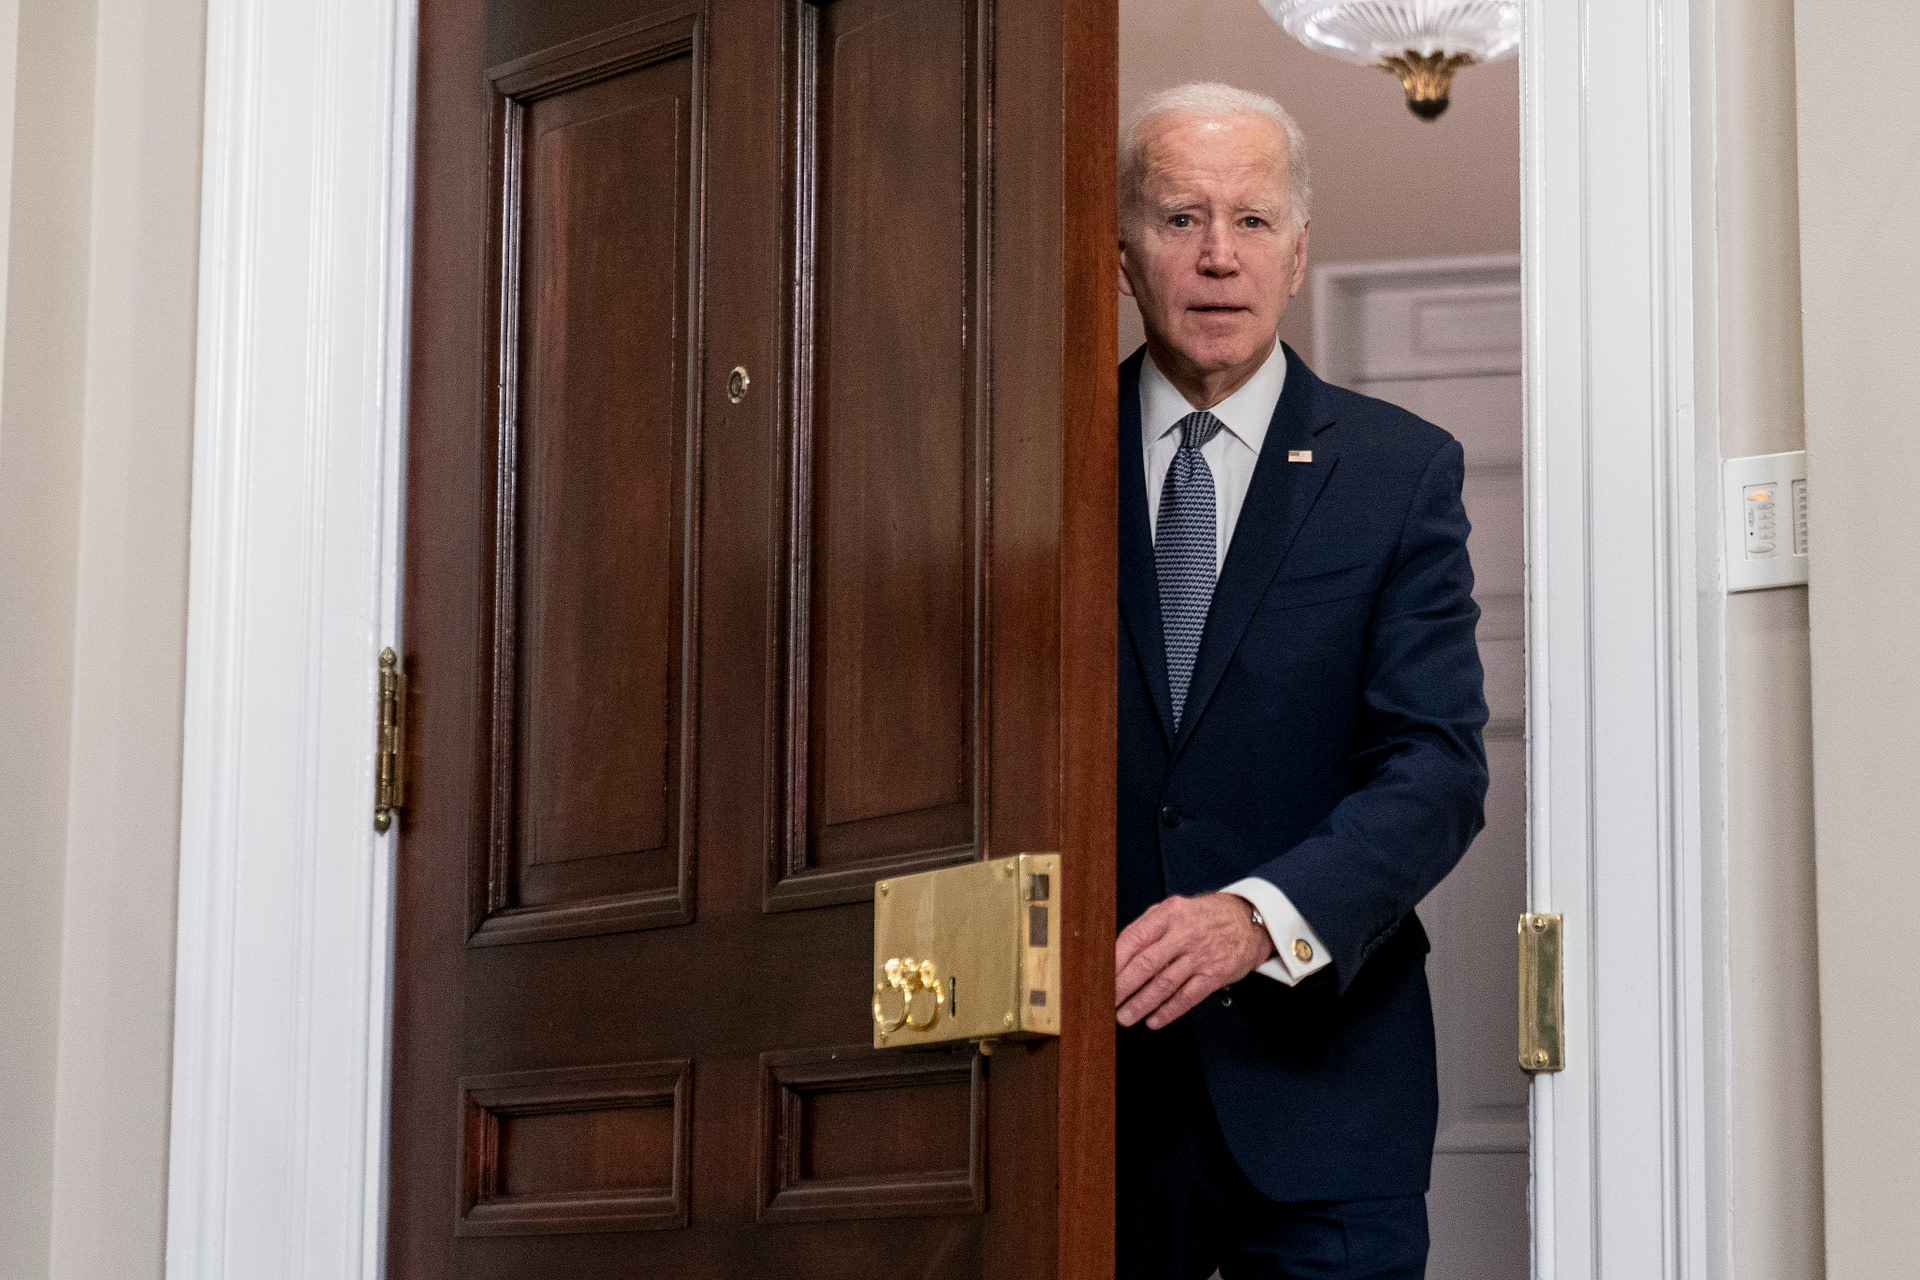 Biden inches closer to the center to win over Republicans he’ll need in 2024